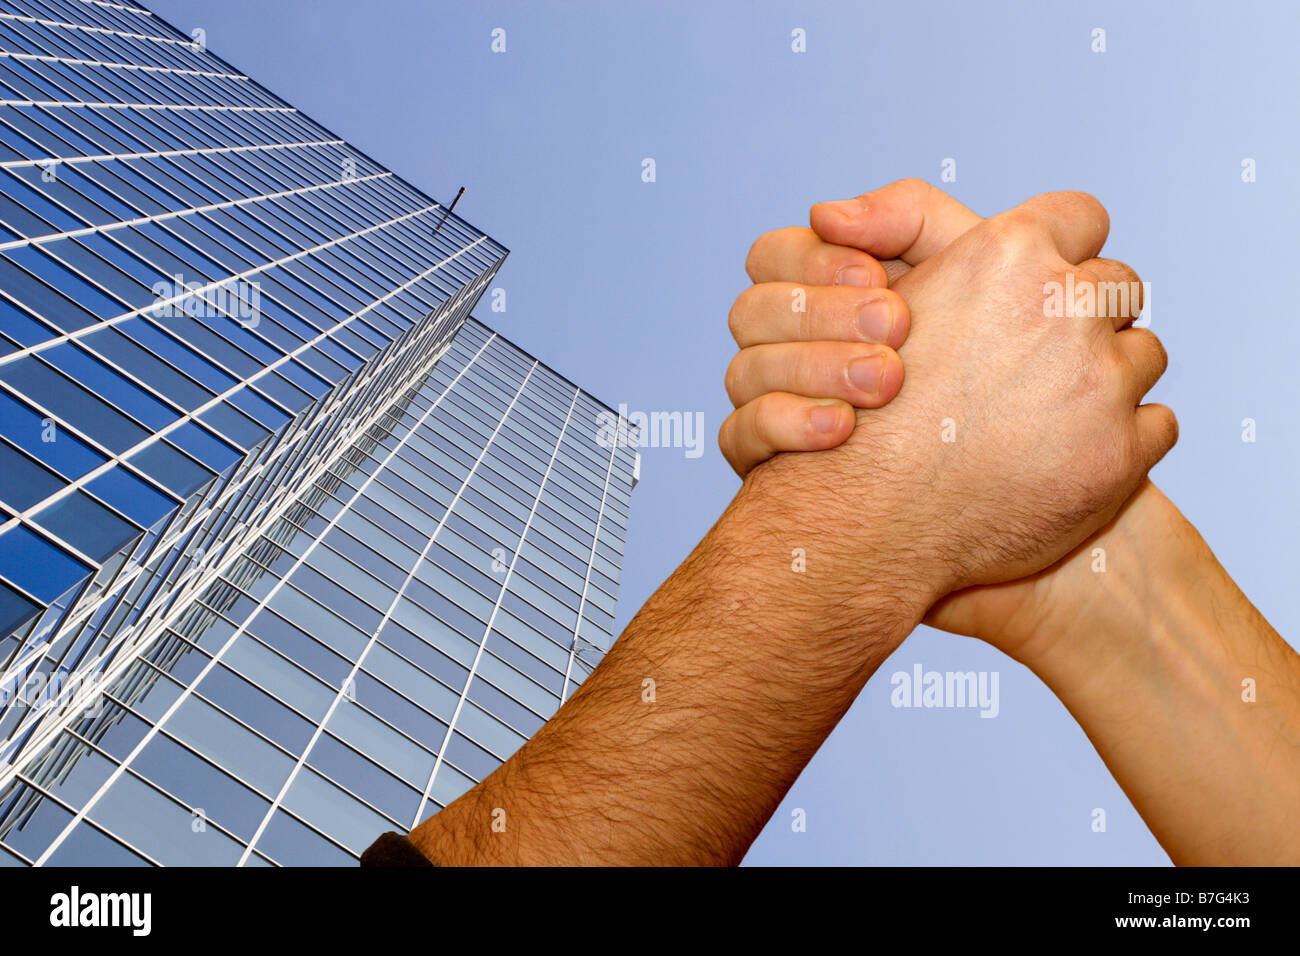 hands of men by emulation and skyscraper Stock Photo